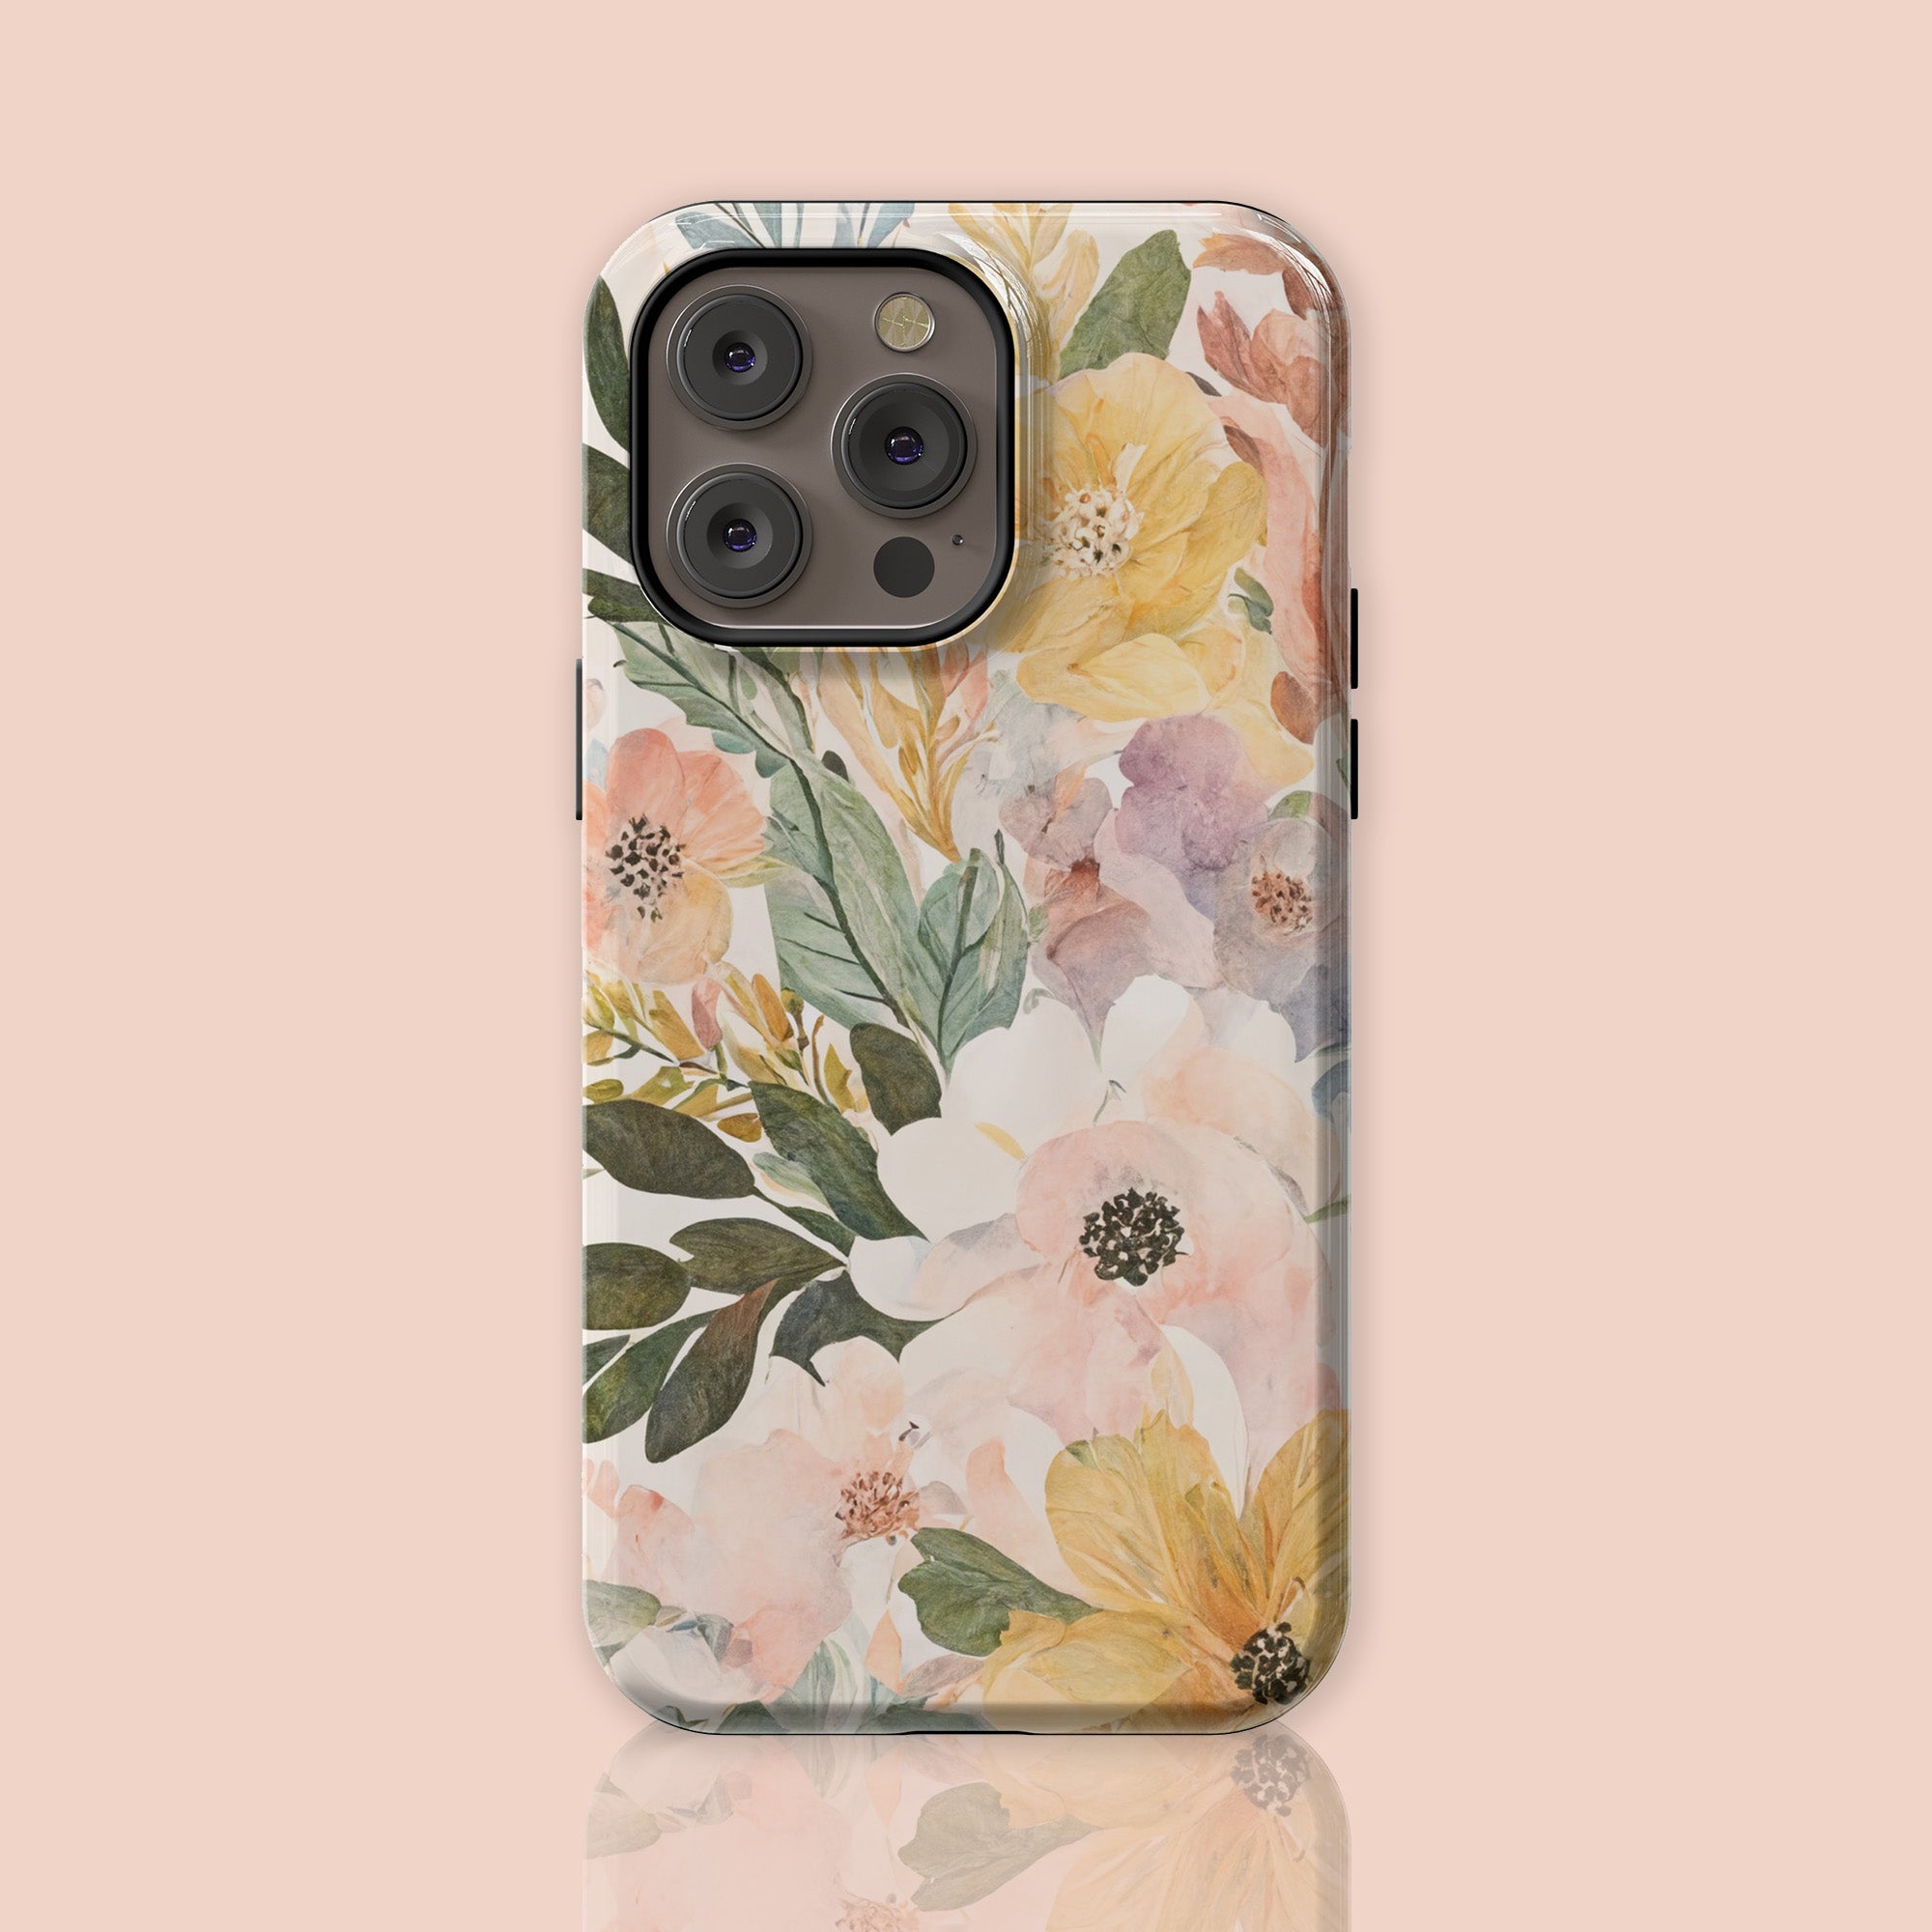 Watercolor Aesthetic Floral Phone Case, iPhone, Samsung